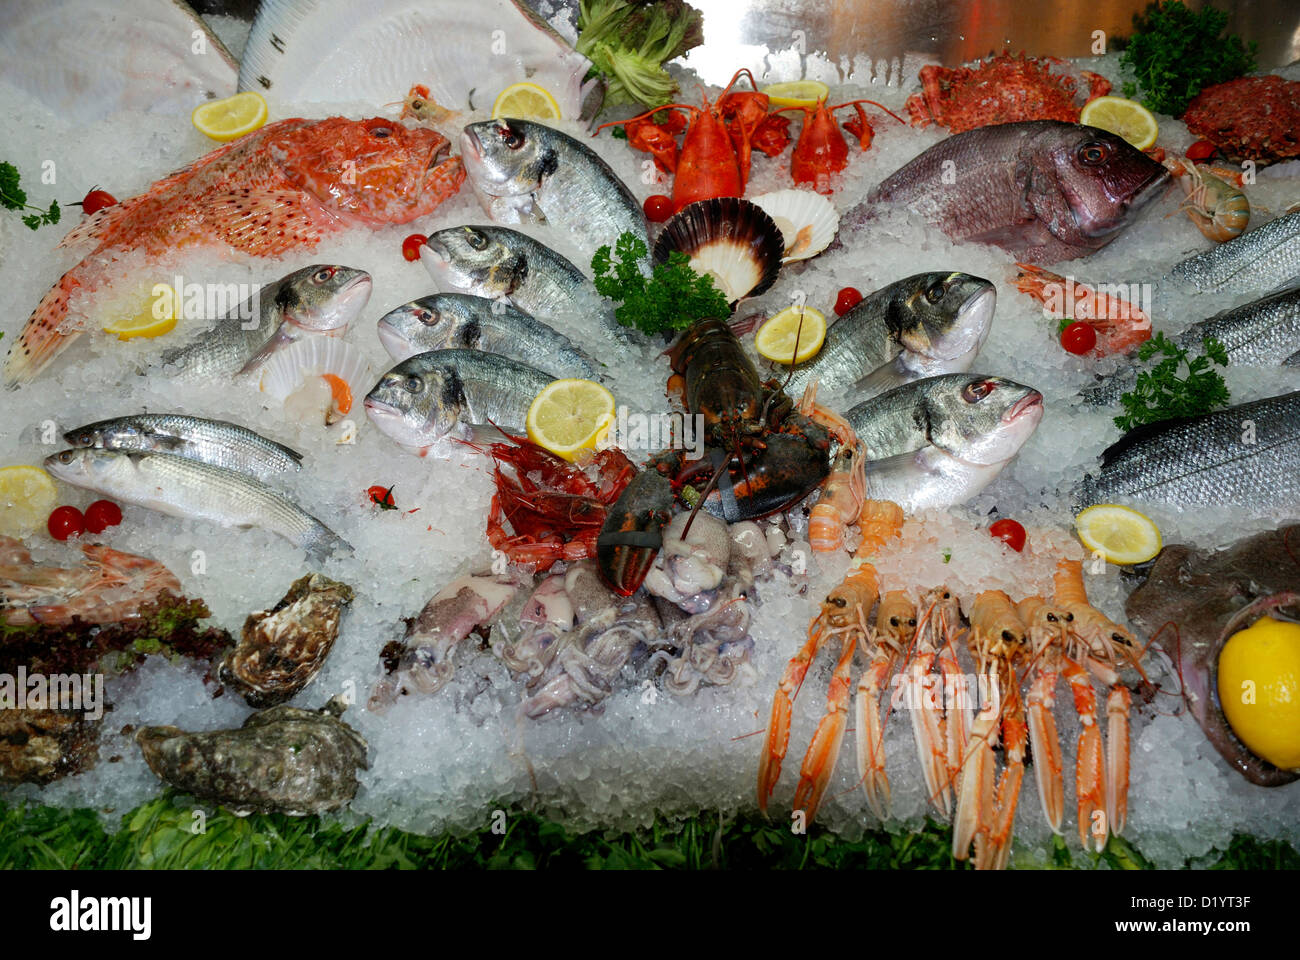 Seafood from the Adriatic Sea on a market in Venice. Stock Photo